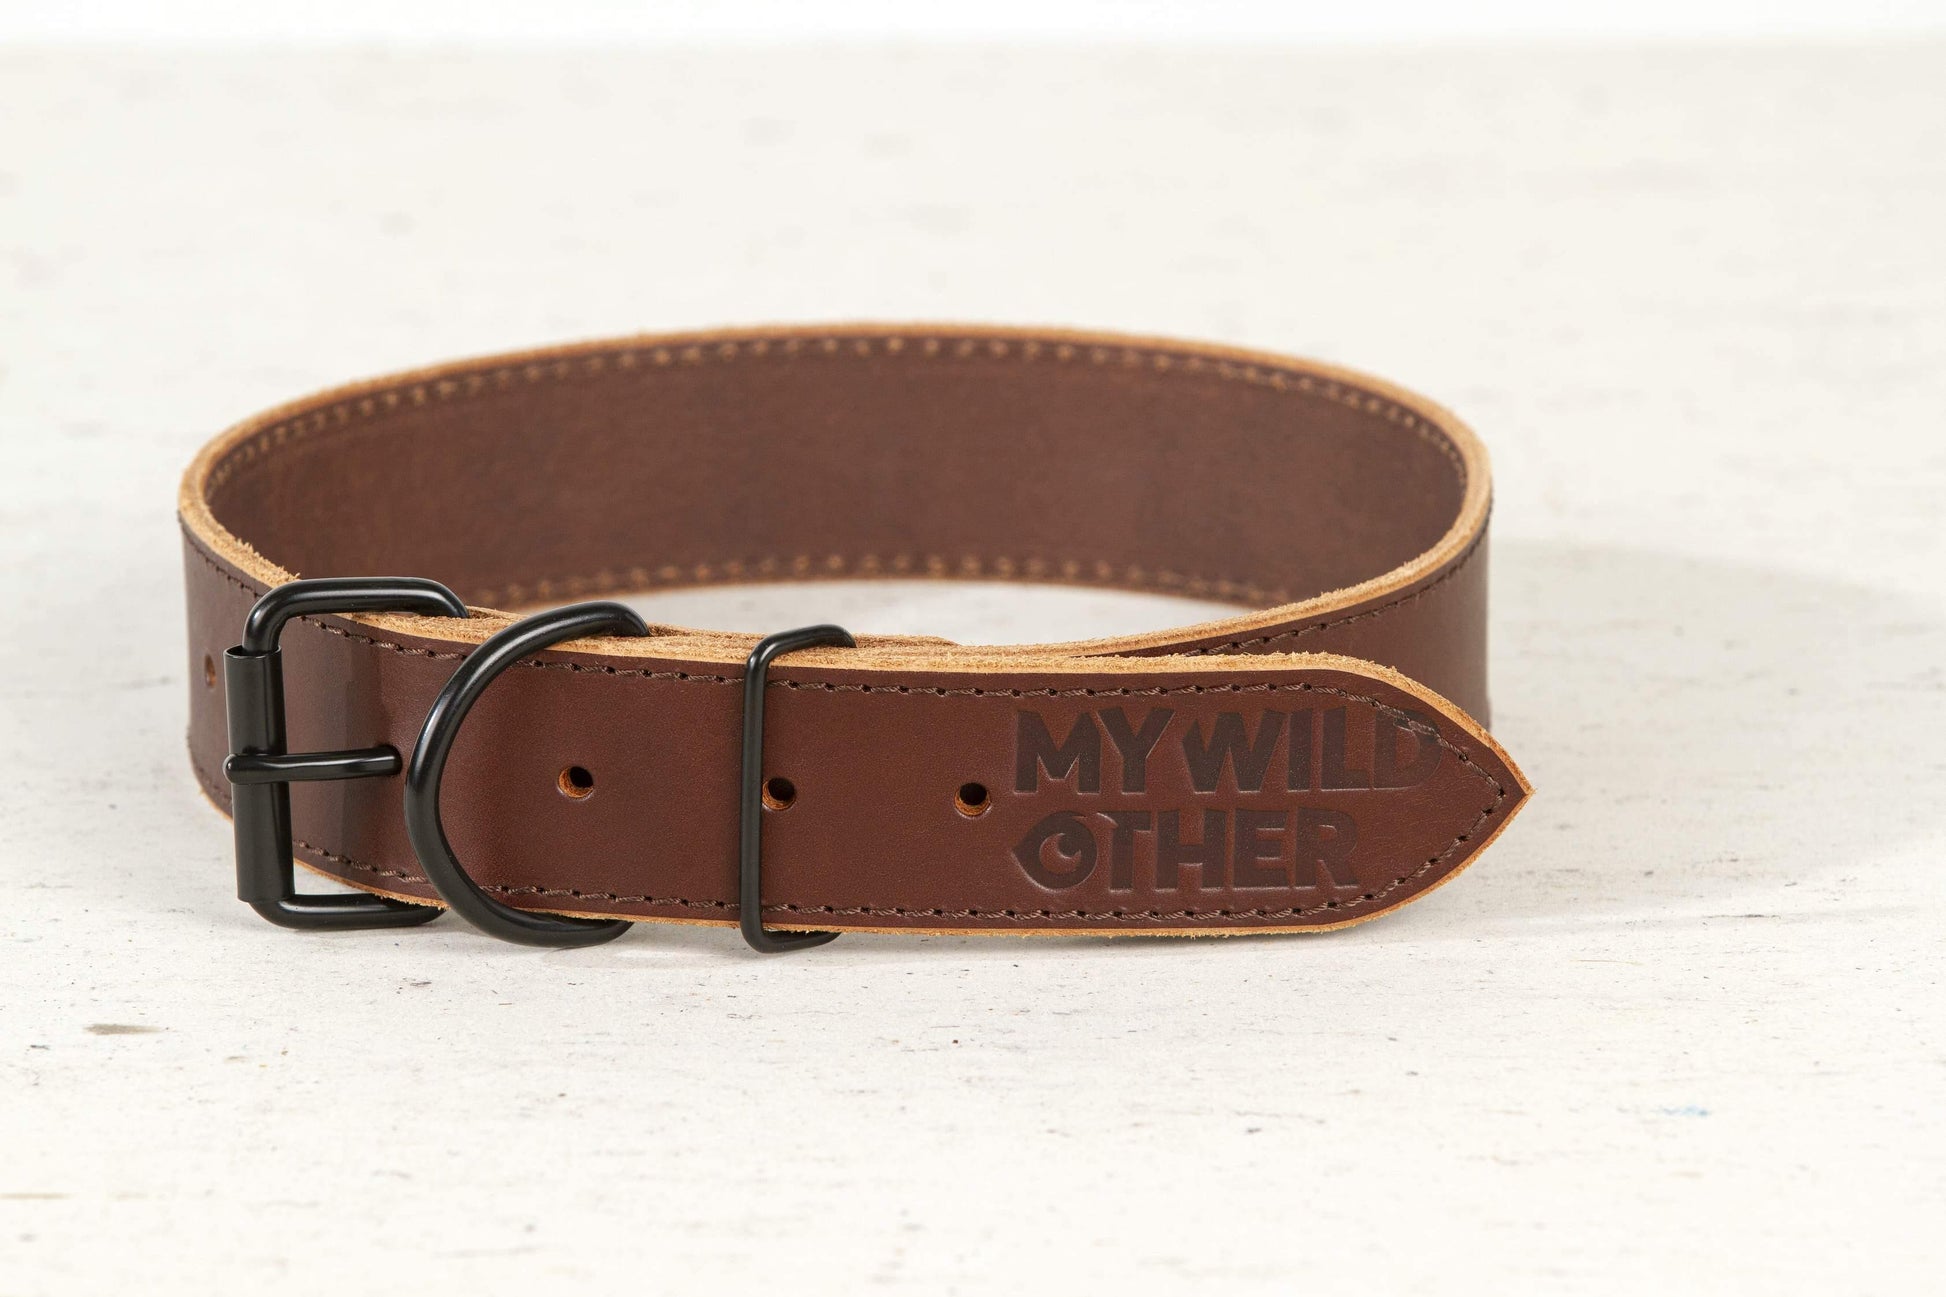 Handmade brown leather dog collar - premium dog goods handmade in Europe by My Wild Other